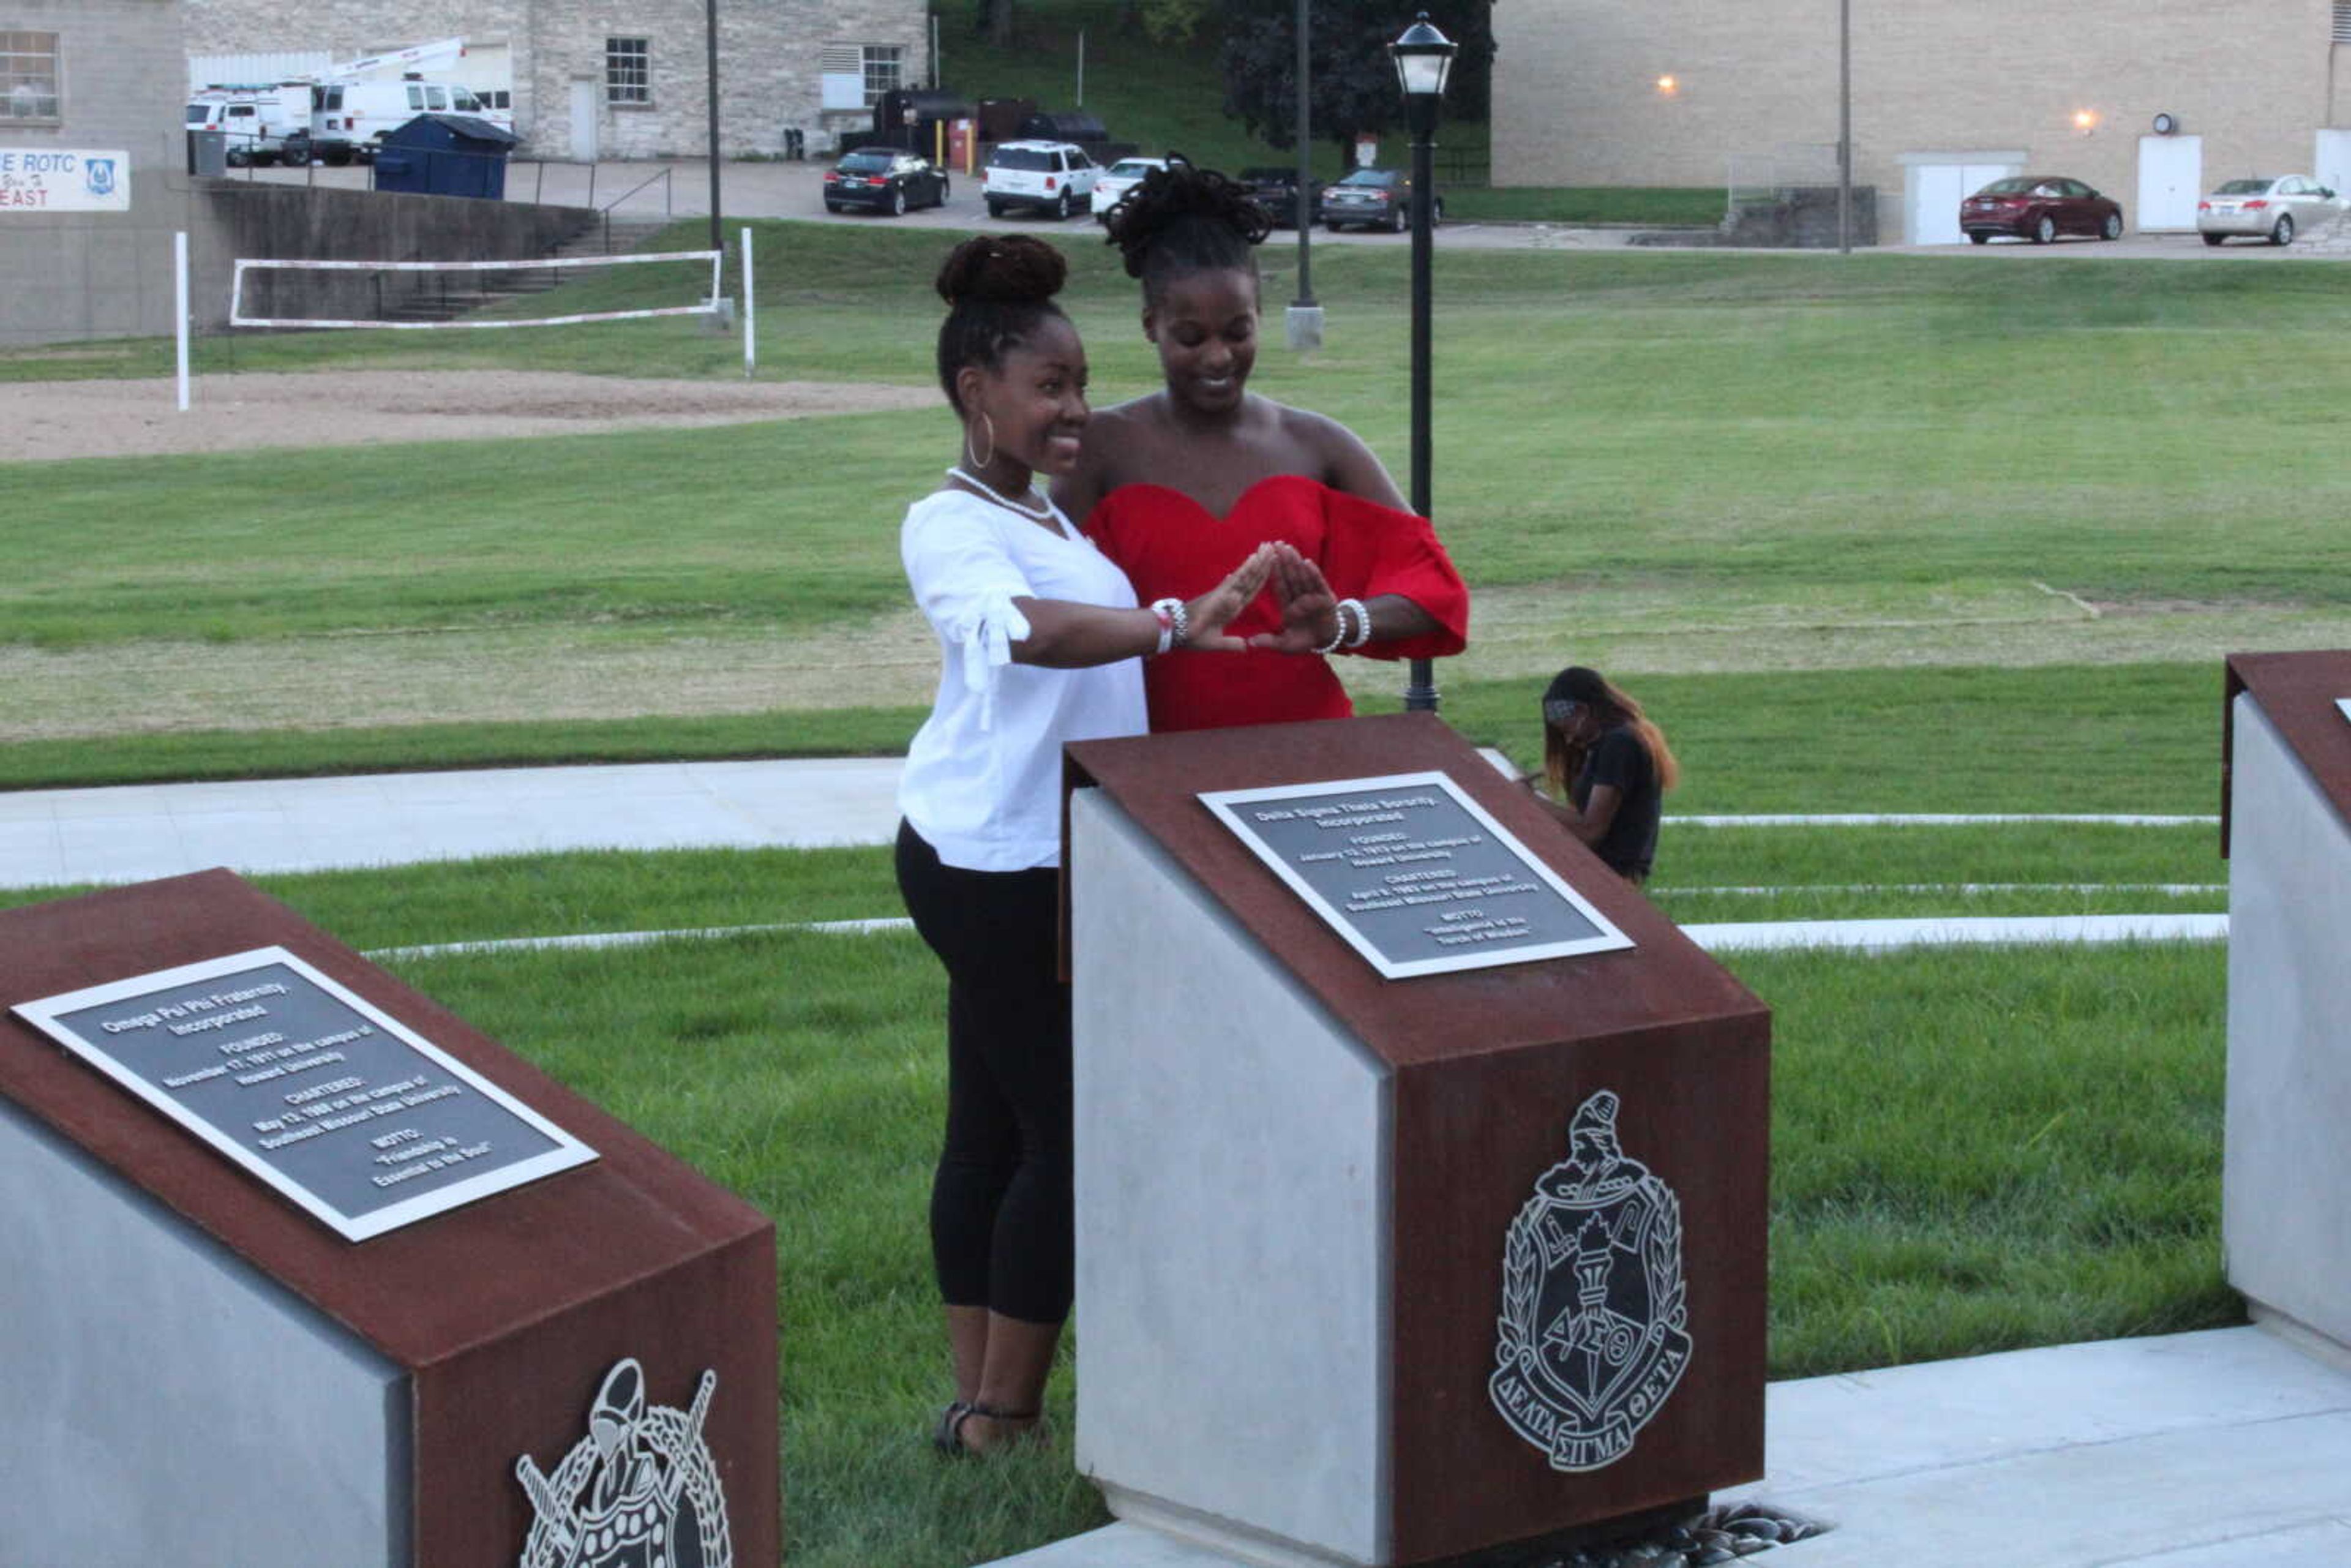 Jaleea Hudson-Wilson, left, and Andrea Cox, right, pose with the plaque honoring their organization Delta Sigma Theta, at the opening ceremony for the NPHC Plaza Aug. 16.